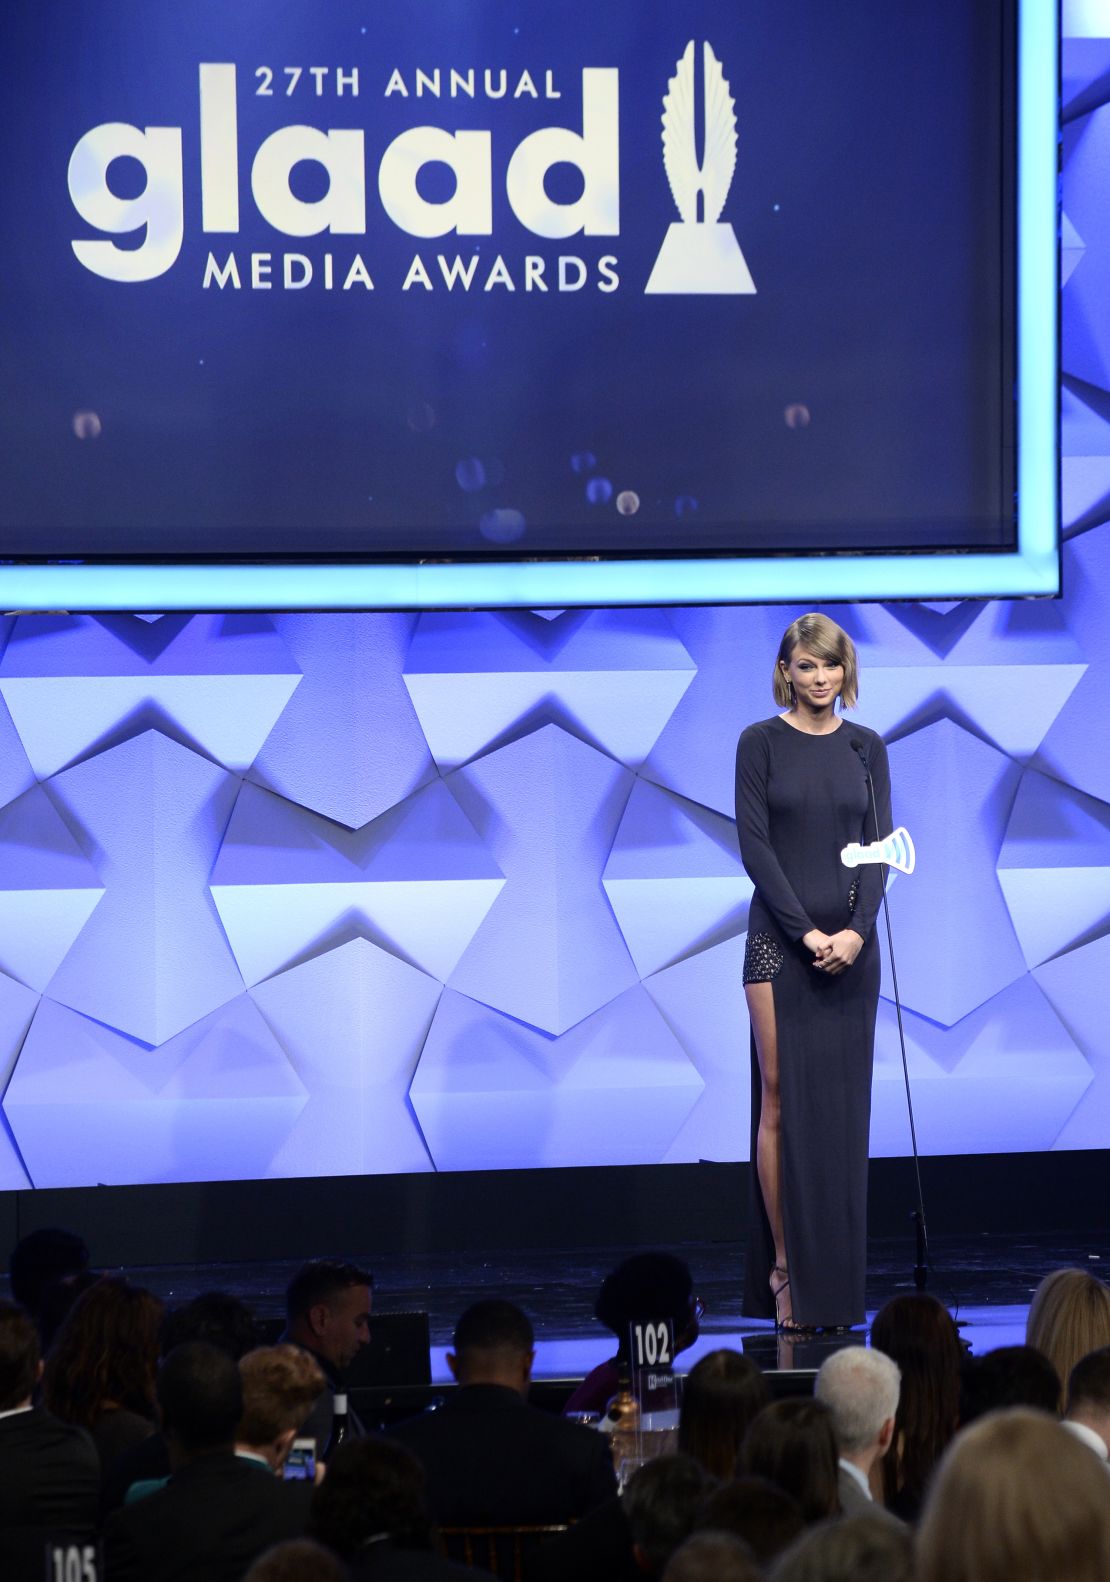 BEVERLY HILLS, CALIFORNIA - APRIL 02:  Recording artist Taylor Swift speaks onstage during the 27th Annual GLAAD Media Awards at the Beverly Hilton Hotel on April 2, 2016 in Beverly Hills, California.  (Photo by Frazer Harrison/Getty Images for GLAAD)